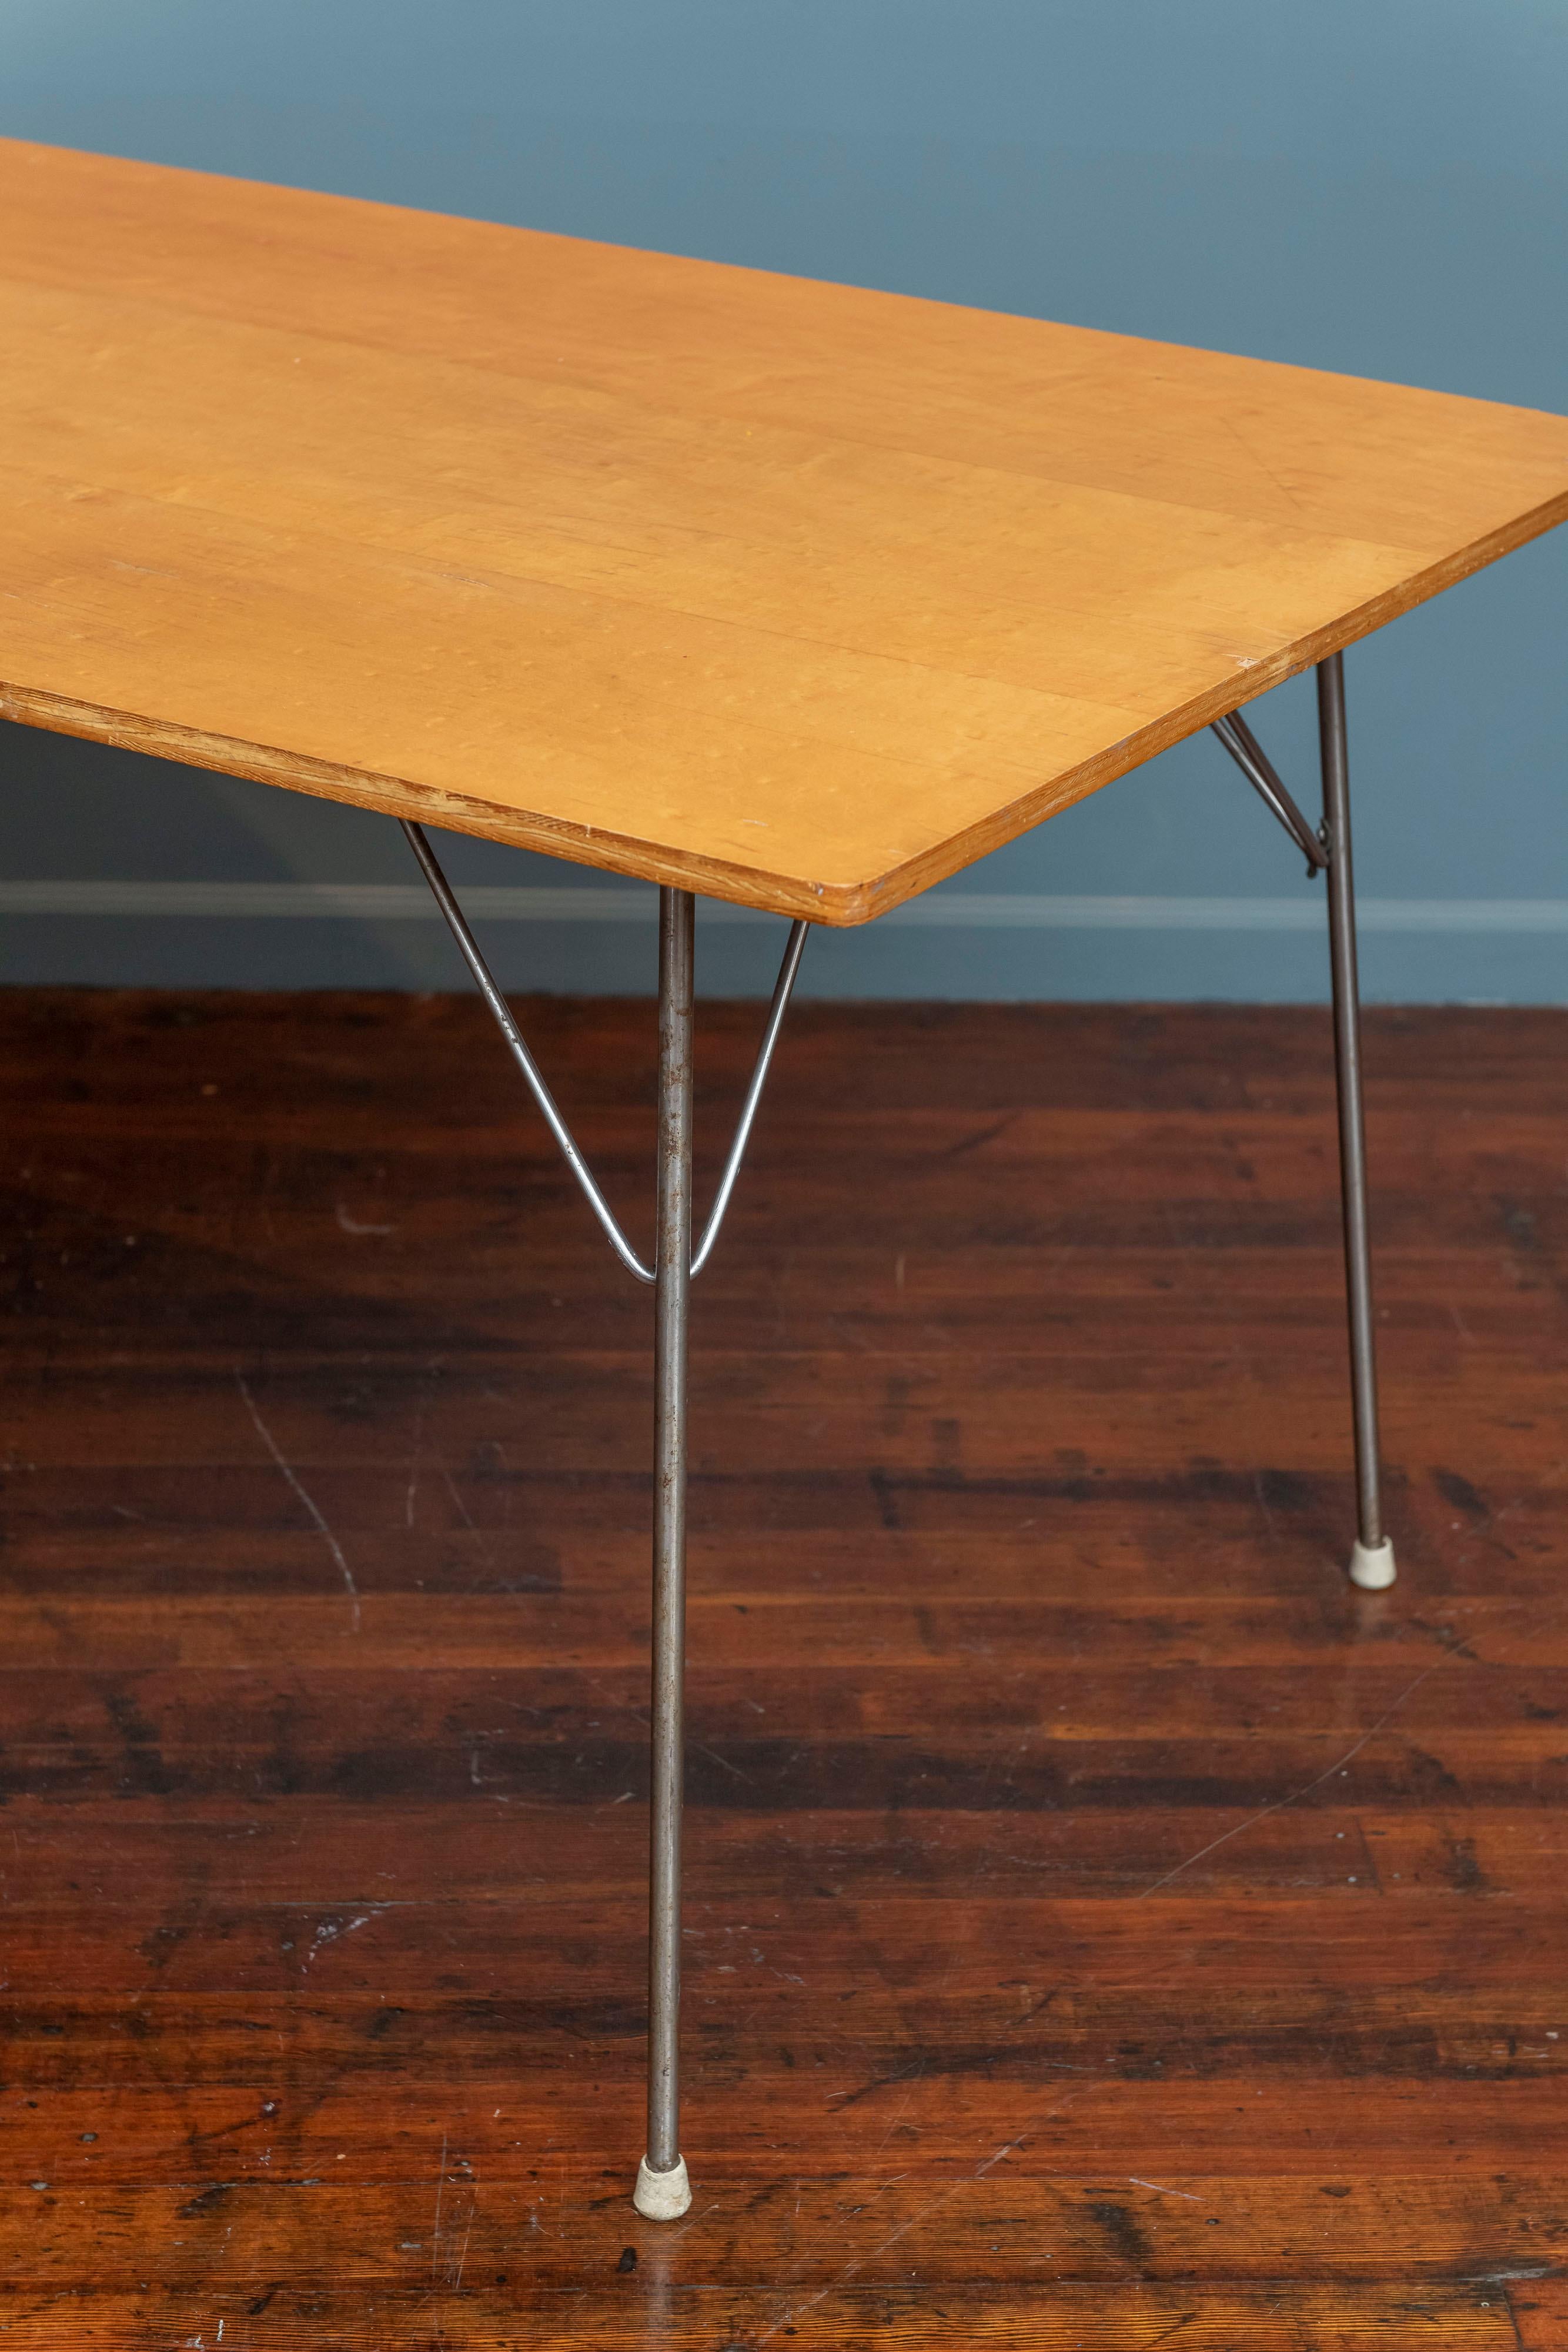 Eames DTM table, early example made from birch veneer plywood with steel folding legs. This is a rare piece of Mid-Century Modern design that is a survivor not a pristine museum quality example. It would make a great addition to your Eames